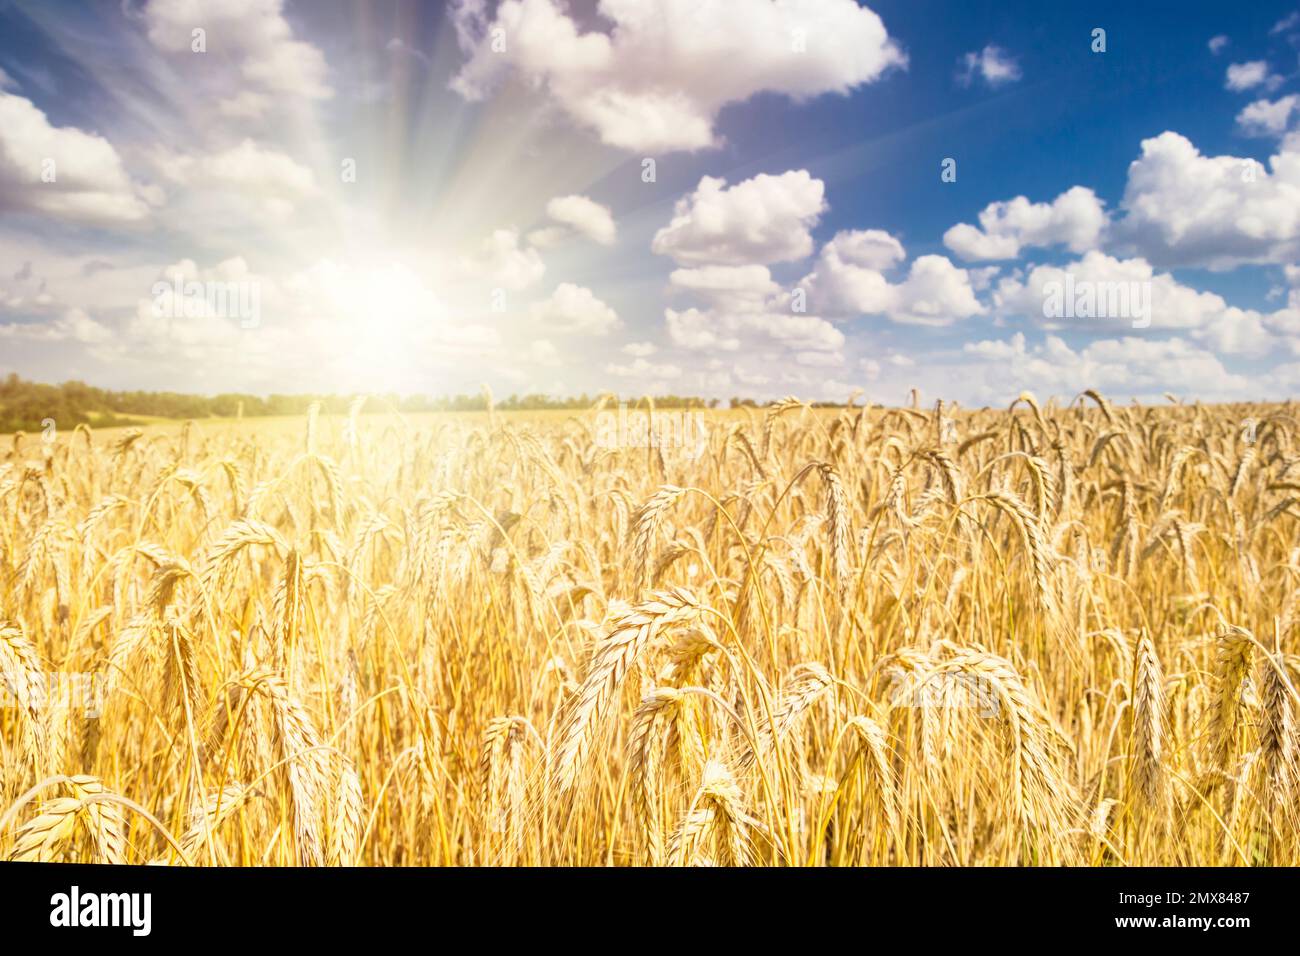 Rural landscape - field common wheat (Triticum aestivum) in the rays summer sun under sky with clouds Stock Photo